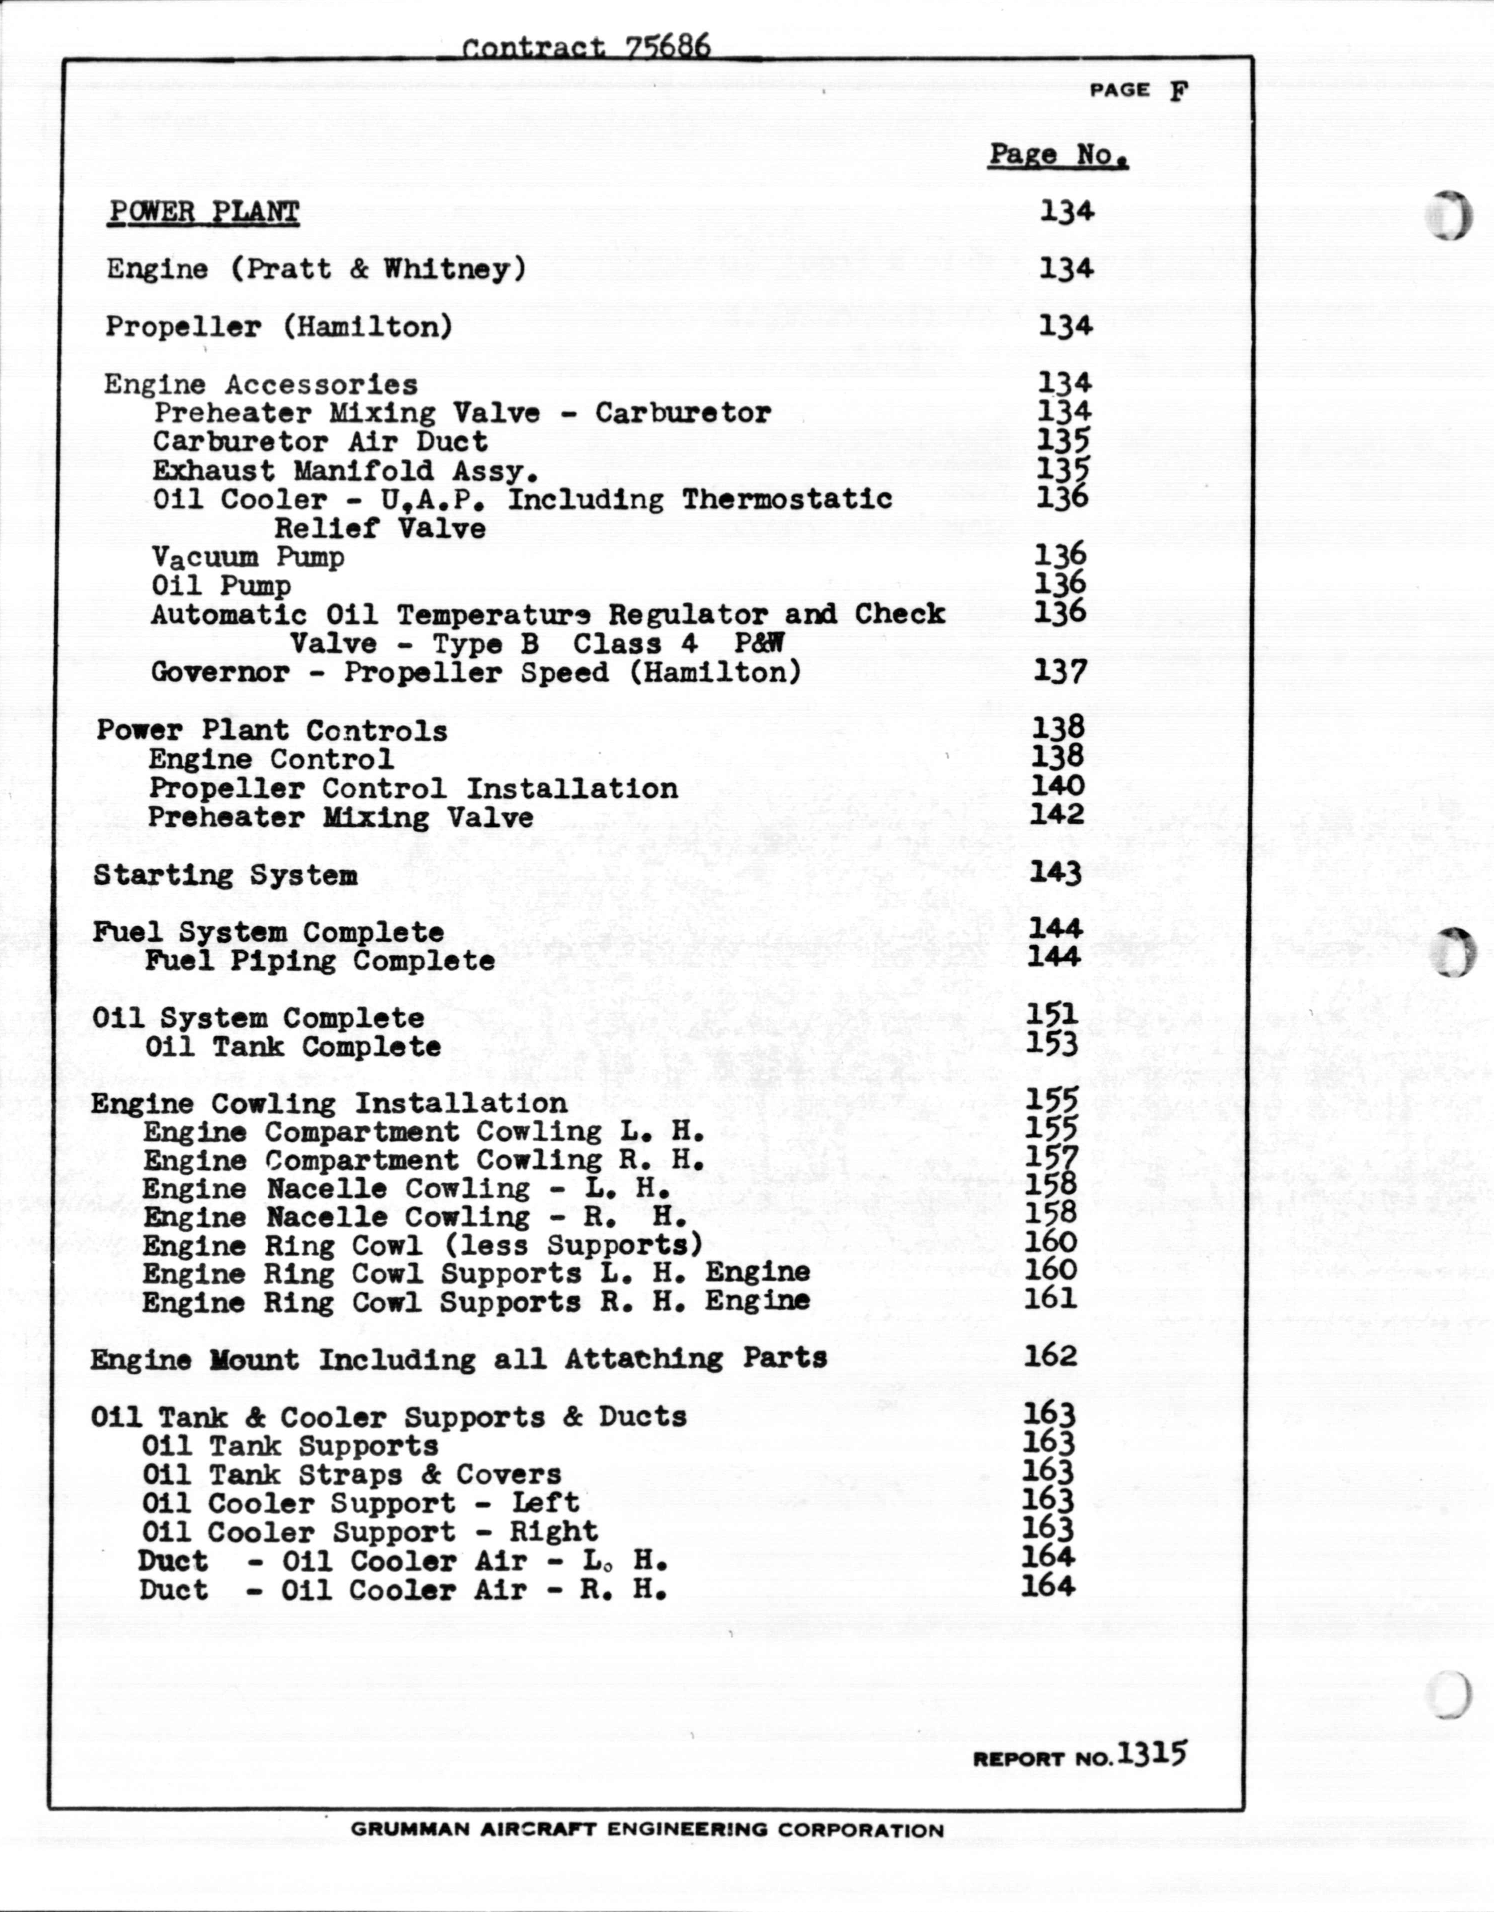 Sample page 6 from AirCorps Library document: Final Spare Parts List with Prices for JRF-4 and -5 Airplanes